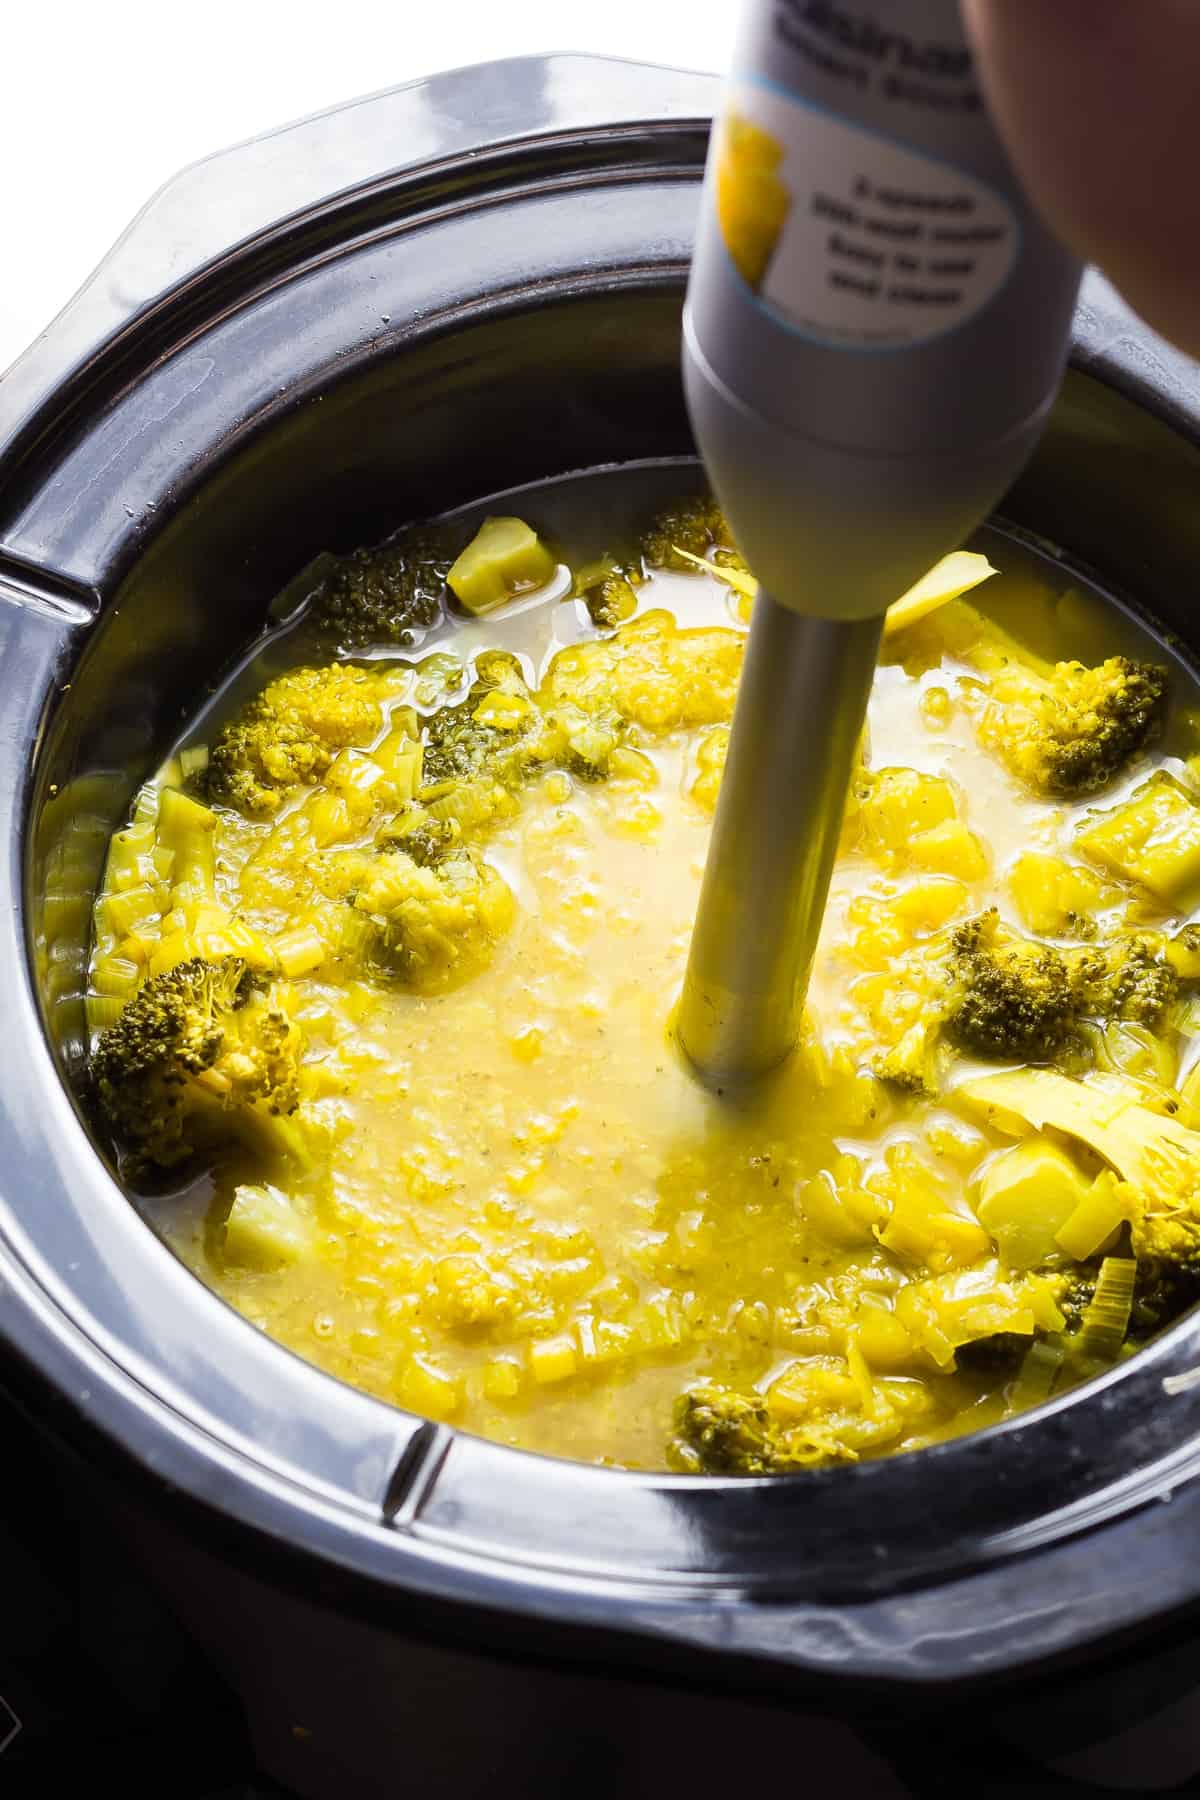 pureeing the broccoli turmeric soup after cooking